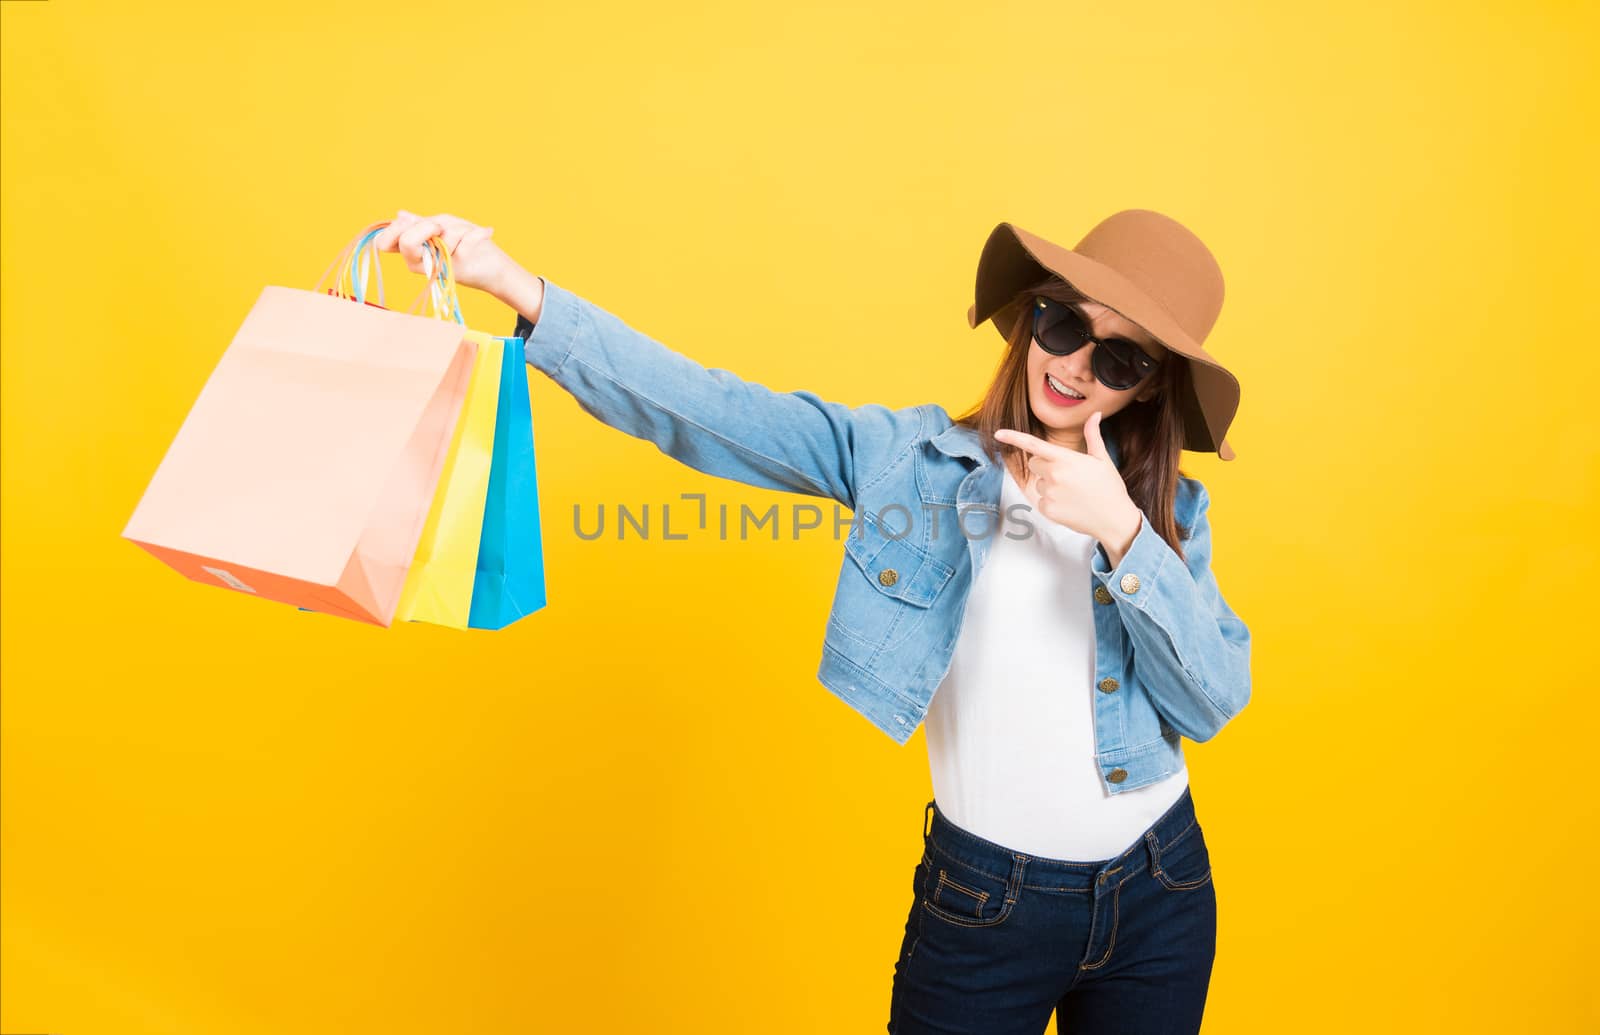 woman teen smiling standing with sunglasses excited holding shop by Sorapop